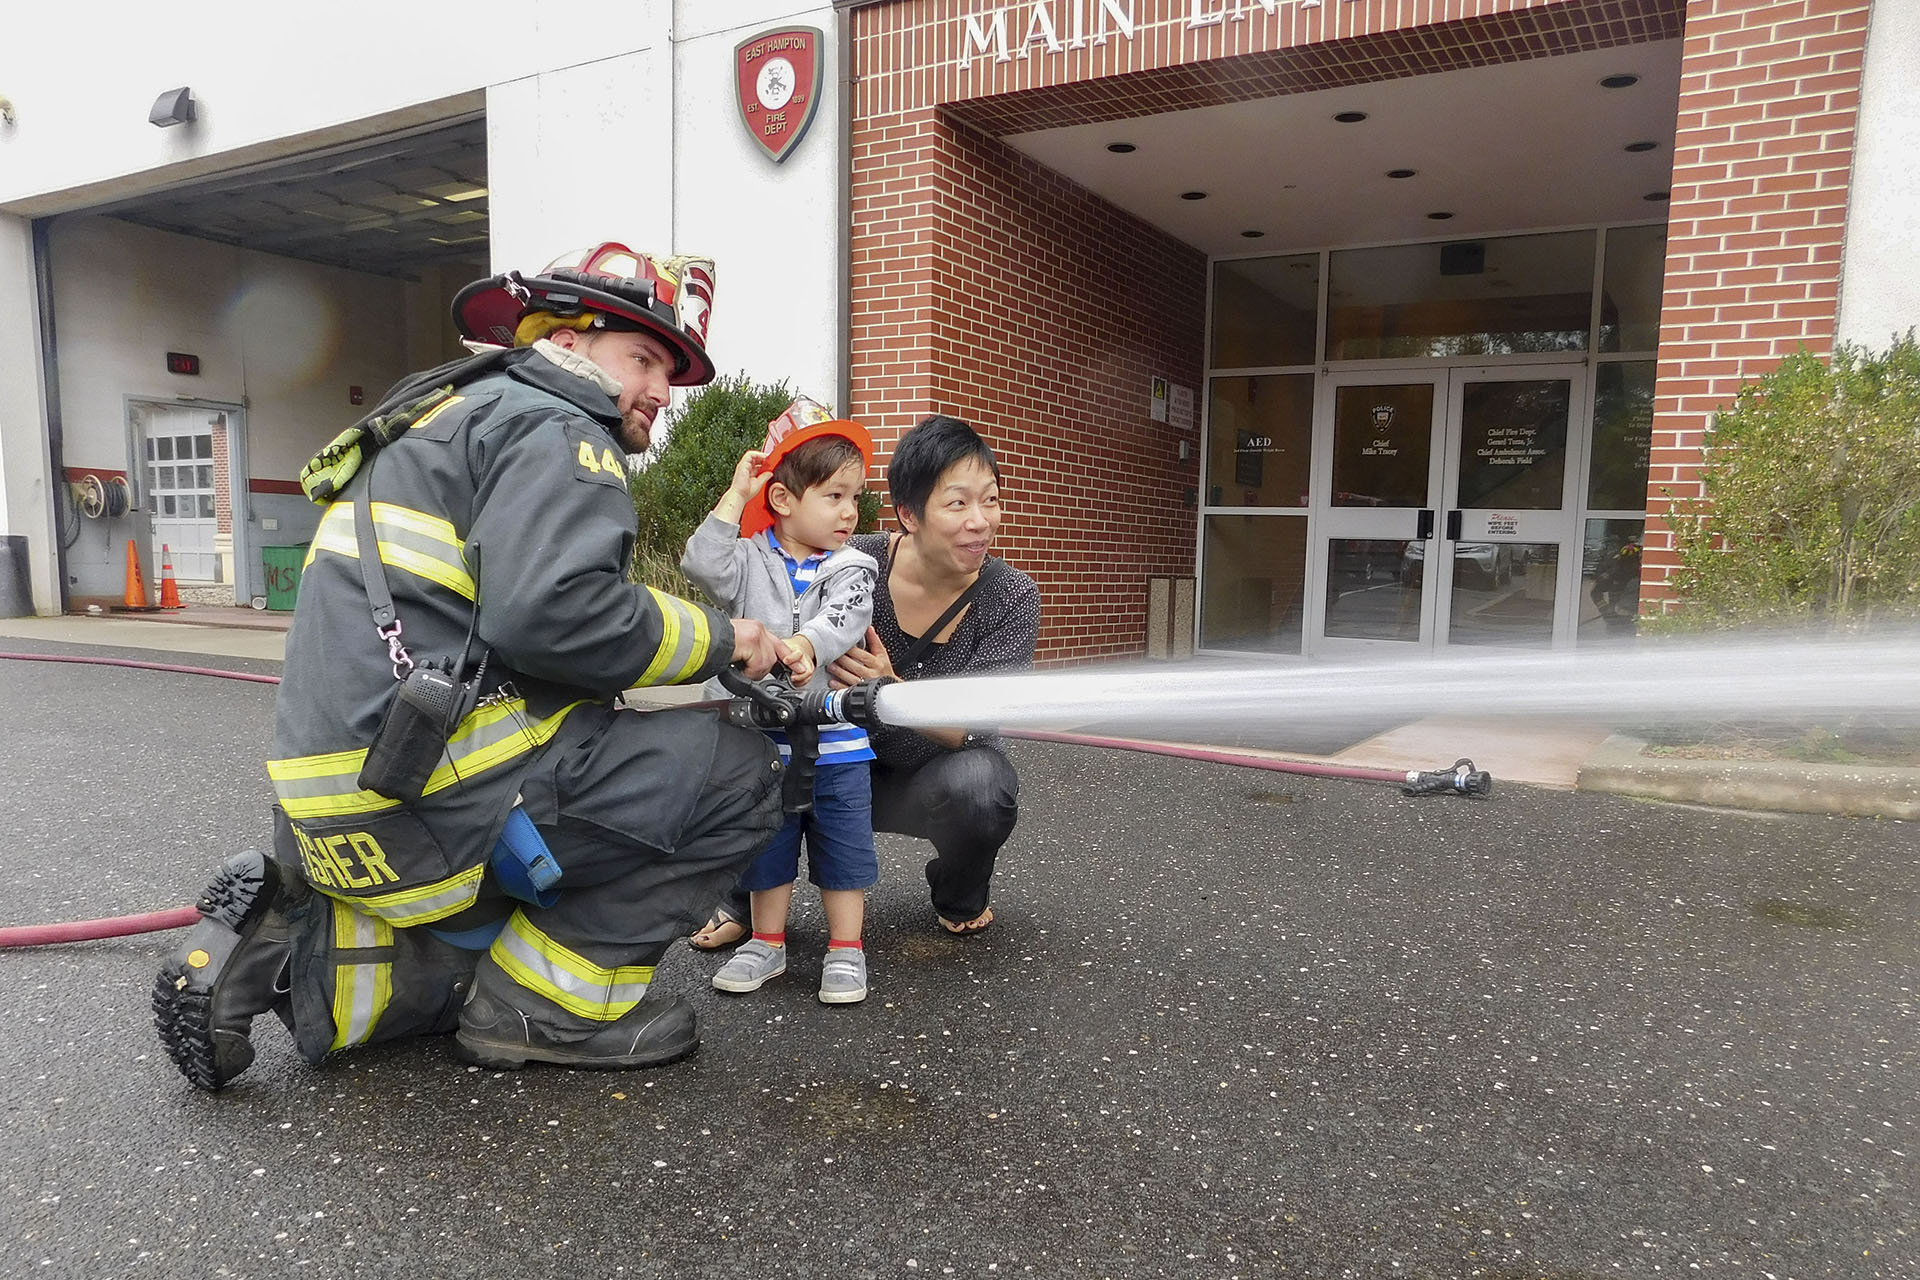 Young Finn Frazer tries his hand at using a hose with the help of mom and East Hampton Firefighter Sam Fisher during the East Hampton Fire Department Open House on Sunday, October 7th, 2018